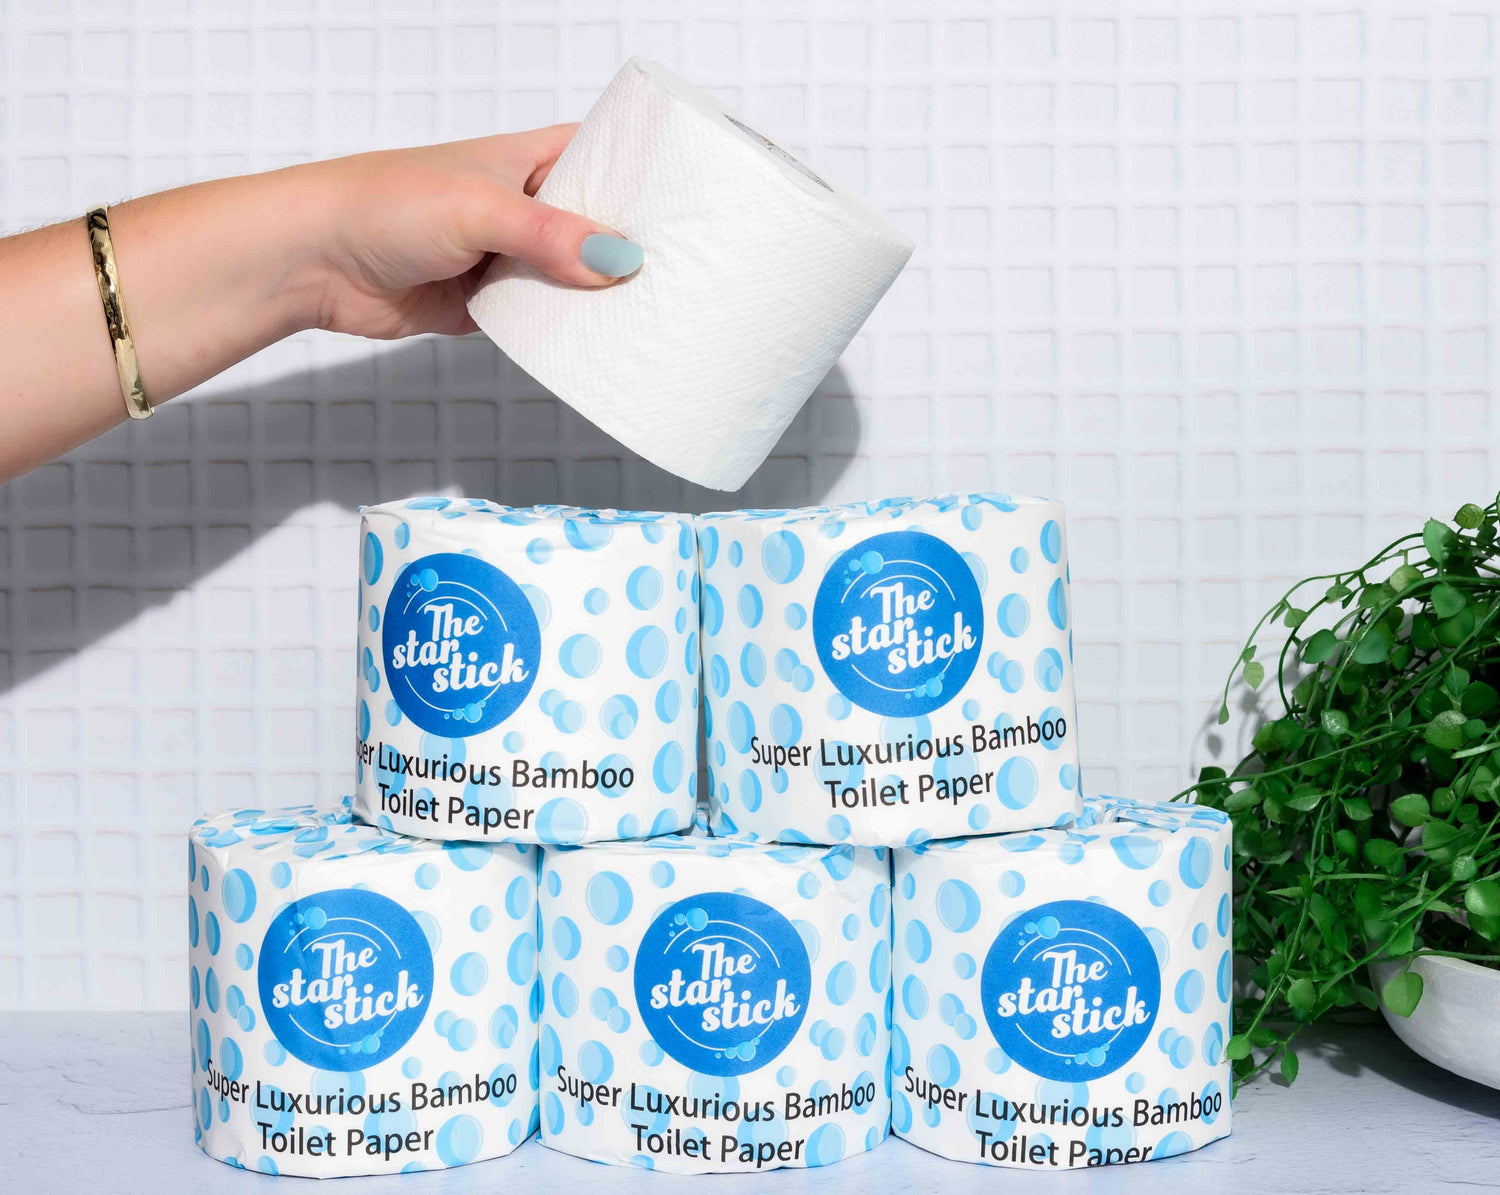 Luxurious 100% Bamboo Toilet Paper - The Star Stick